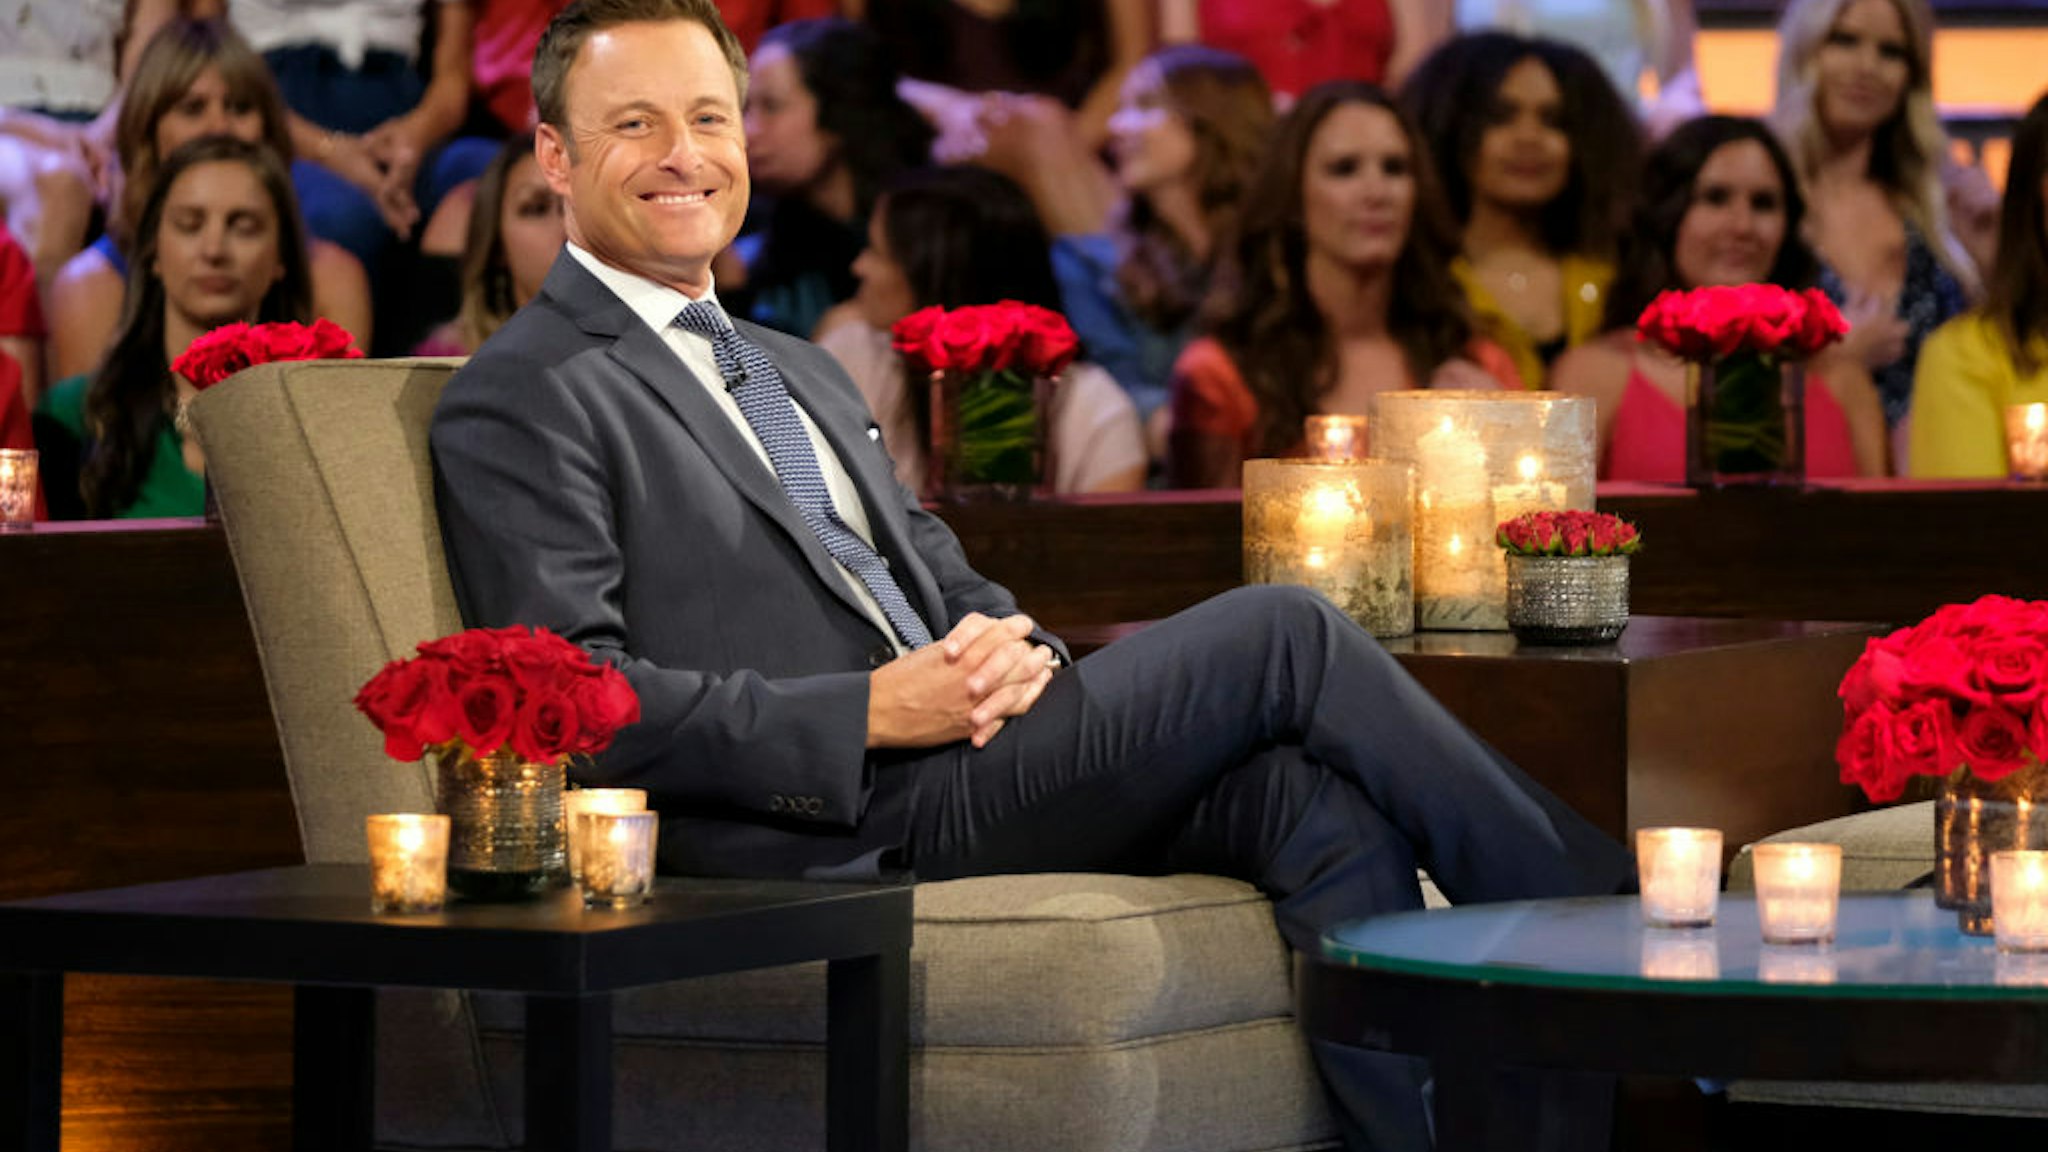 THE BACHELORETTE: THE MEN TELL - "The Men Tell All" - Luke P.'s stunning final standoff in Greece is revealed; and then, the controversial bachelor will take the hot seat opposite Chris Harrison to give his side of the story. The other men, fired up by Luke P.'s self-defense, explode into the vitriolic outburst they have been holding back all season long. The other most memorable bachelors - including Brian, Cam, Connor S., Daron, Devin, Dustin, Grant, Dylan, Garrett, John Paul Jones, Jonathan, Luke S., Matt, Matteo, Mike and Ryan -- return to confront each other and Hannah one last time to dish the dirt, tell their side of the story and share their emotional departures. Finally, as the clock ticks down on Hannah's journey to find love, a special sneak peek of her dramatic final week with Jed, Peter and Tyler C. is featured on "The Bachelorette: The Men Tell All," MONDAY, JULY 22 (8:00-10:01 p.m. EDT), on ABC. (John Fleenor/ABC via Getty Images)